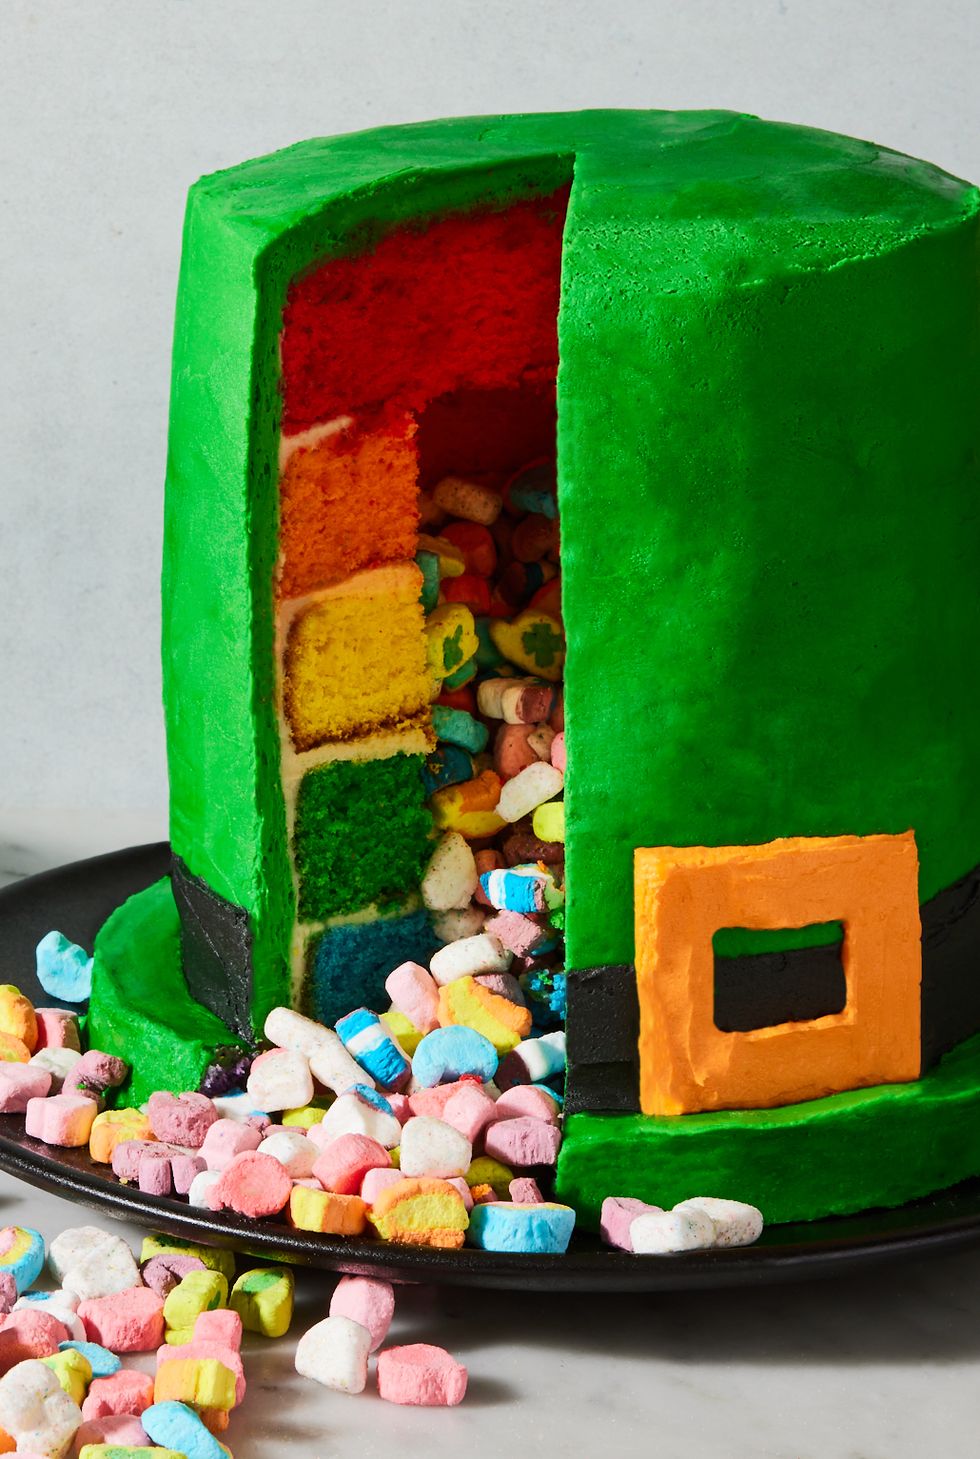 st patricks day top hat cake filled with lucky charm marshmallows